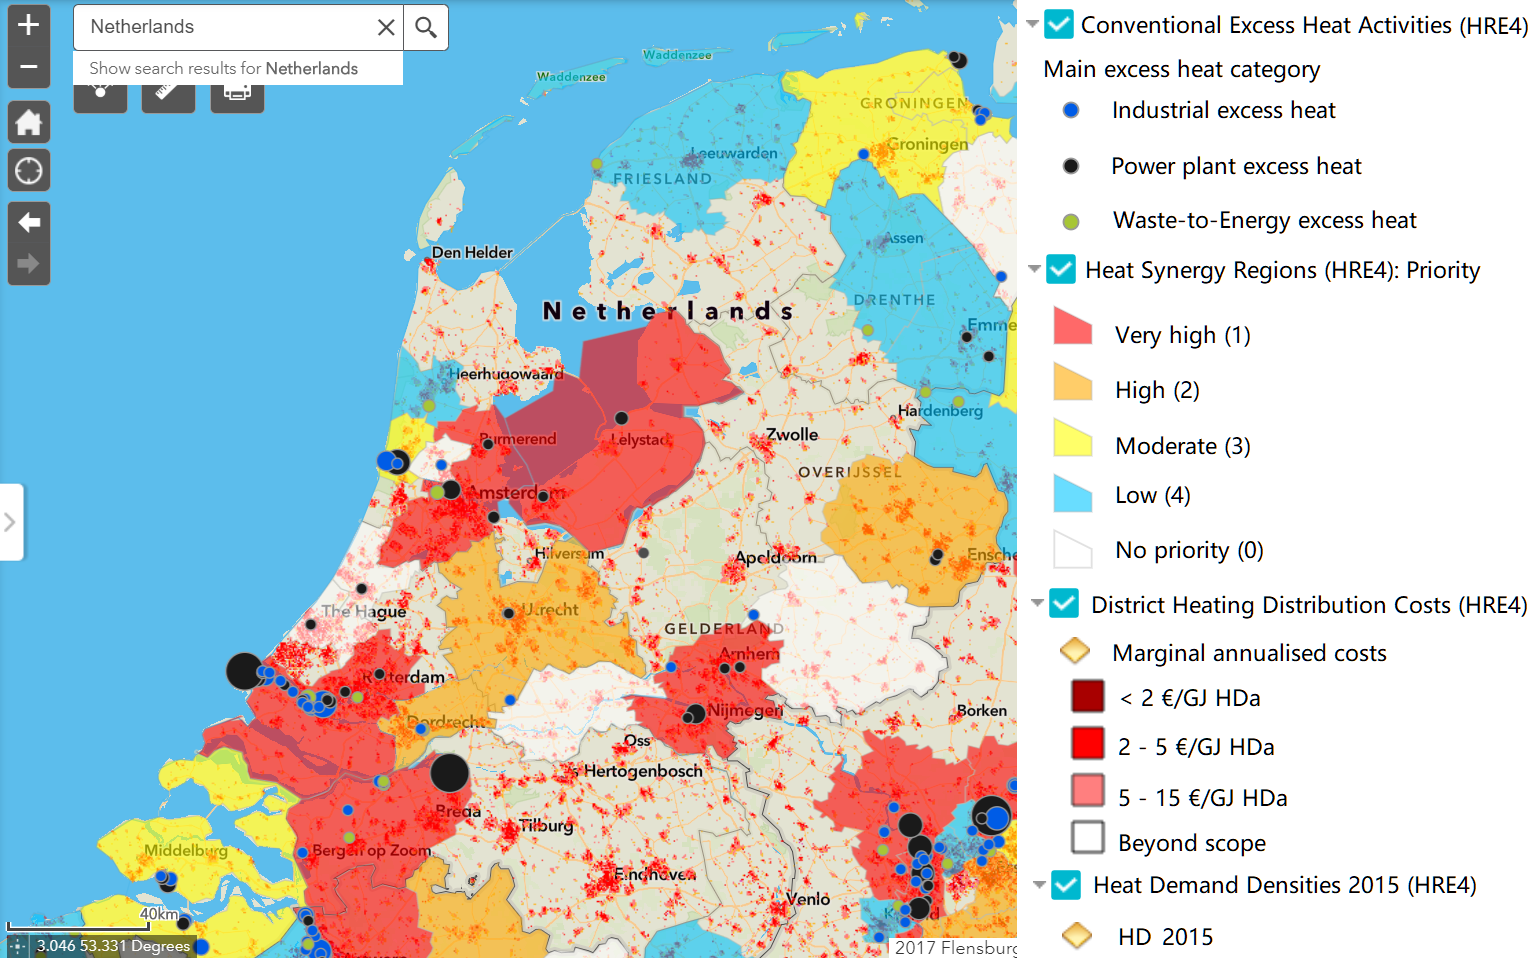 A screenshot of the heat atlas for the Netherlands from the PETA4 mapping application.